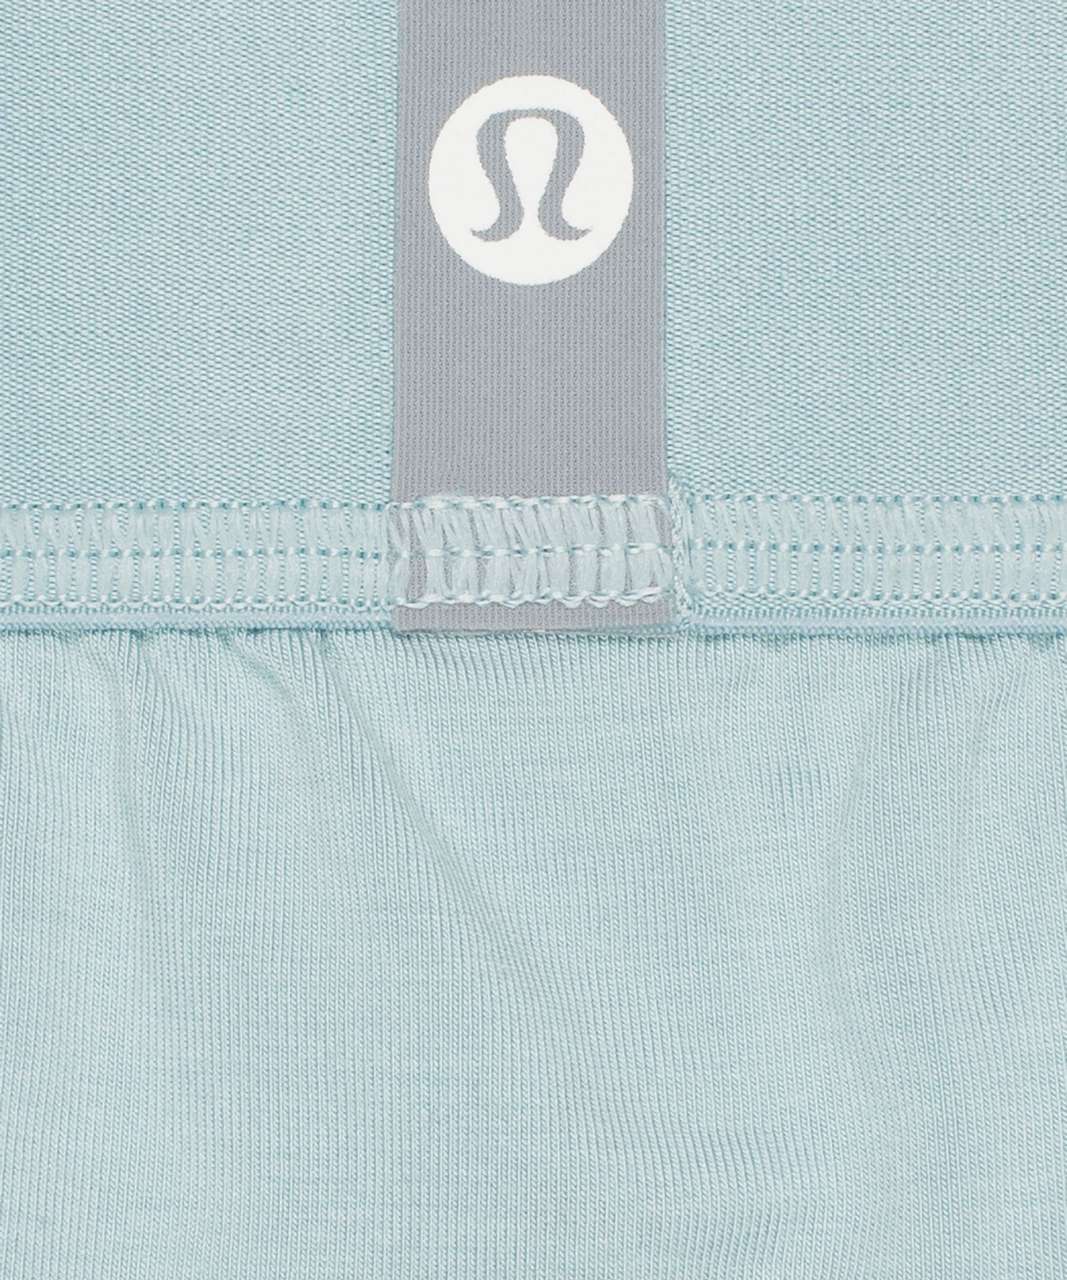 Lululemon Always in Motion Boxer 5" 3 Pack - Dusty Rose / Breeze Blue / Heathered Crest